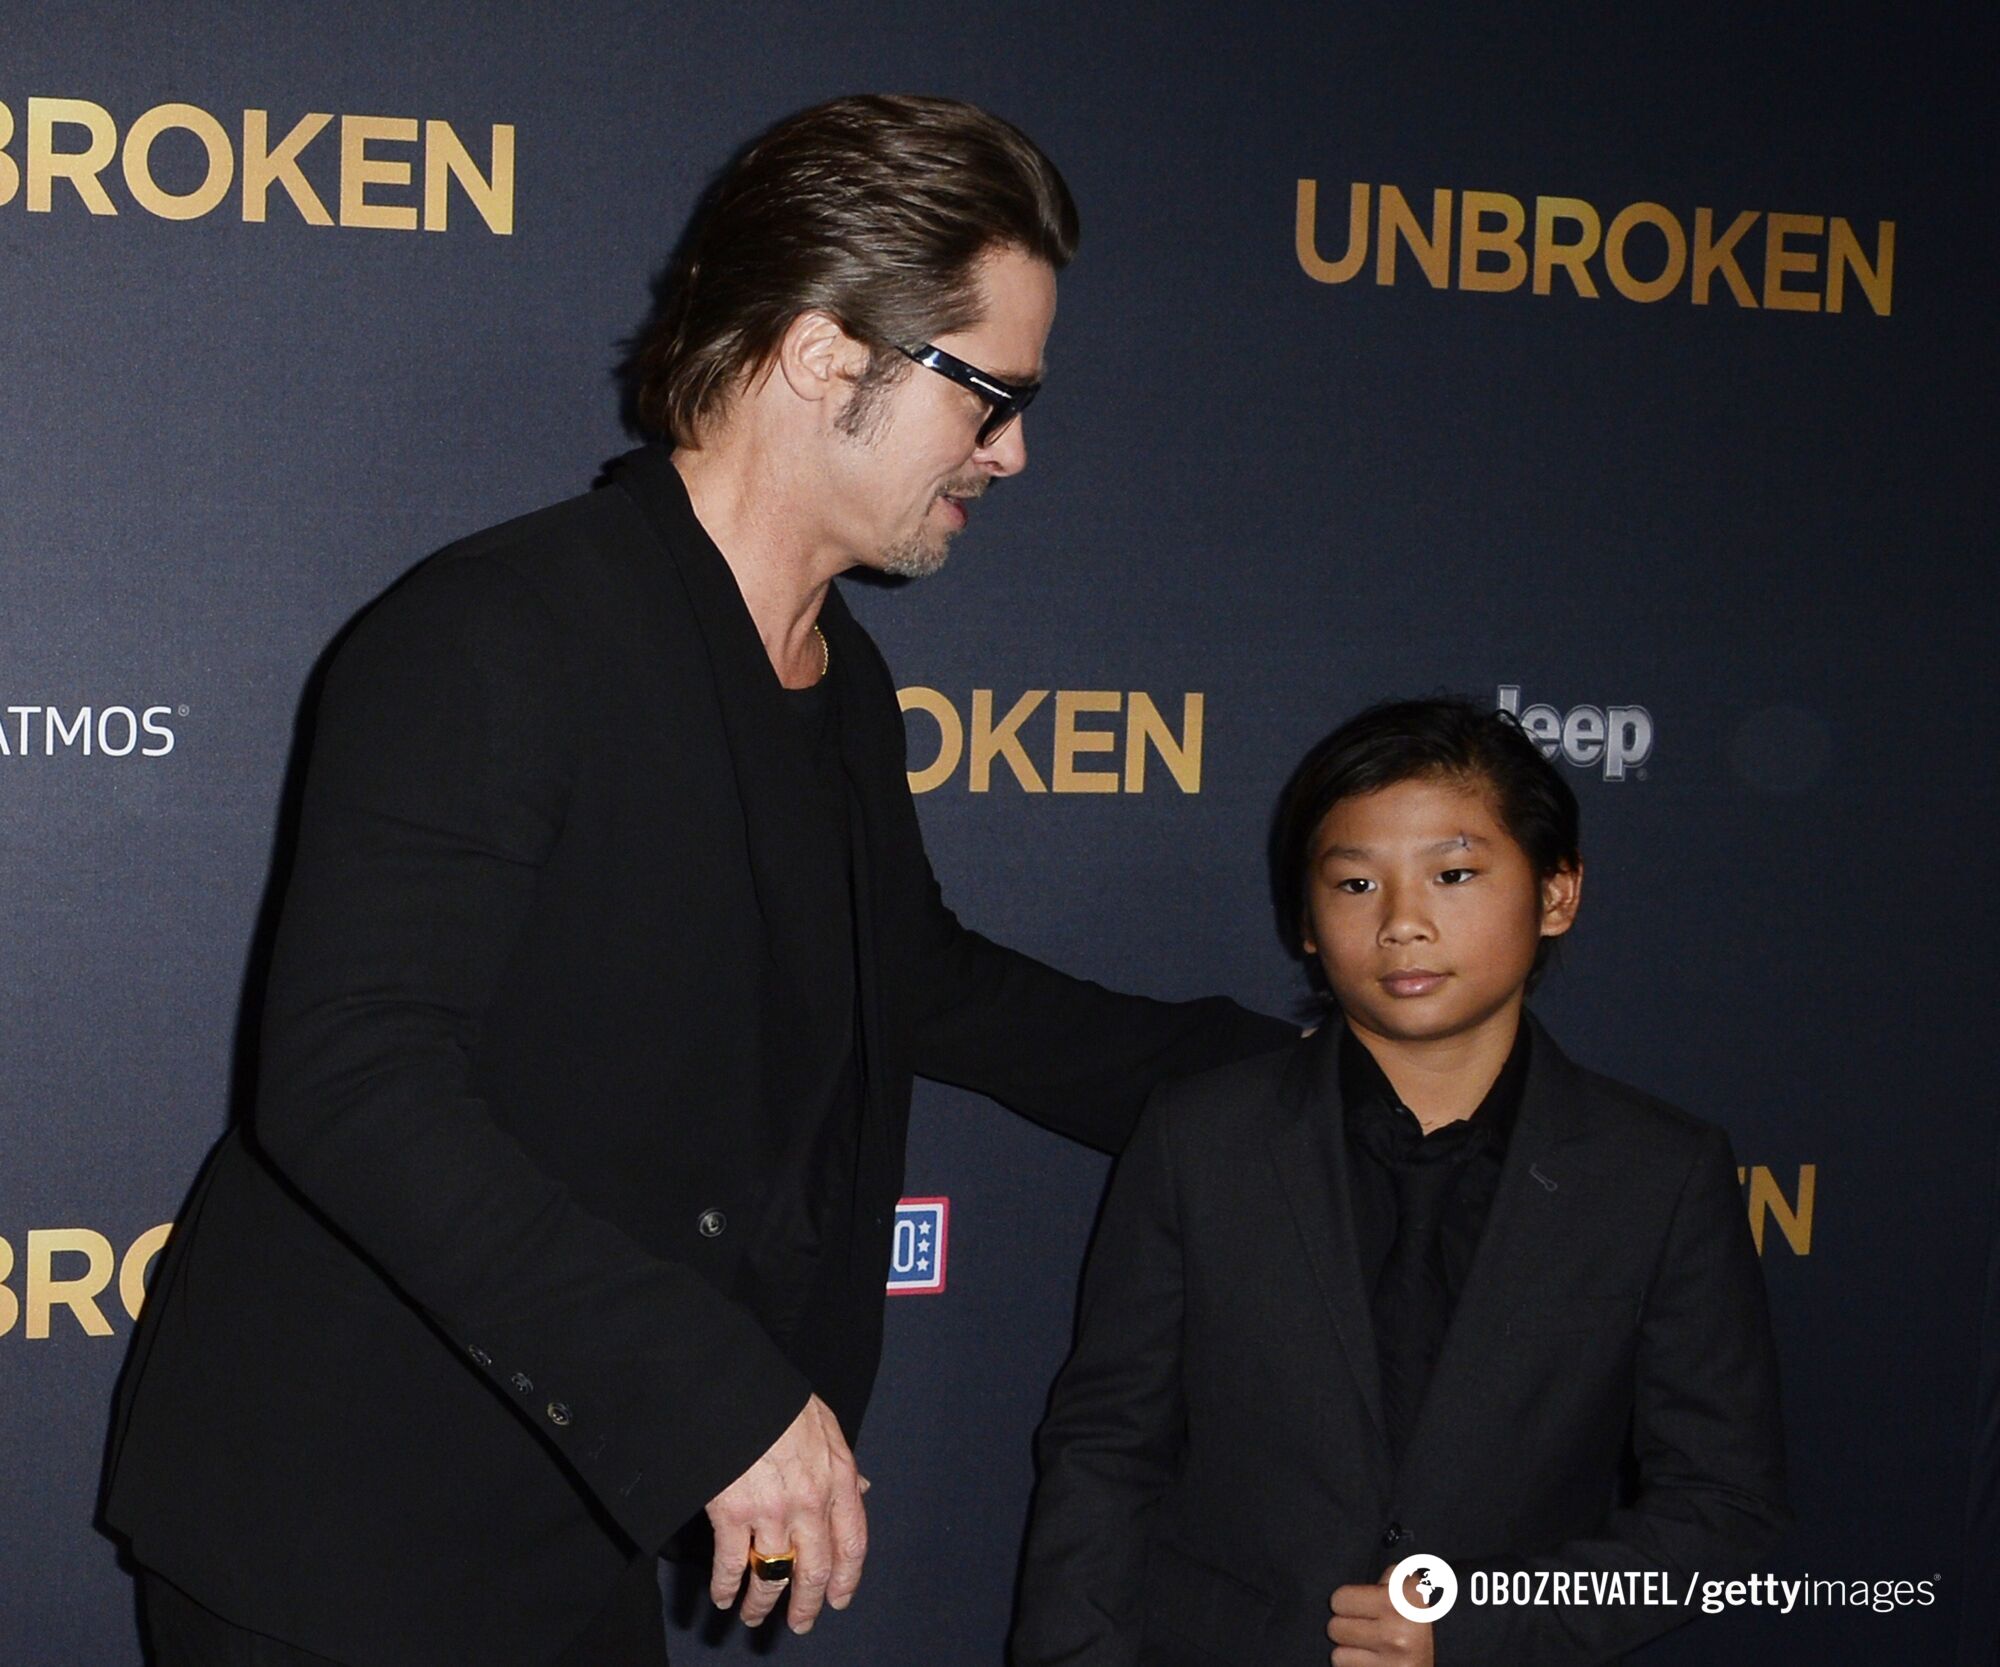 The adopted son of Angelina Jolie and Brad Pitt called the actor a ''scoundrel'' and a ''mean man'' who makes children tremble with fear